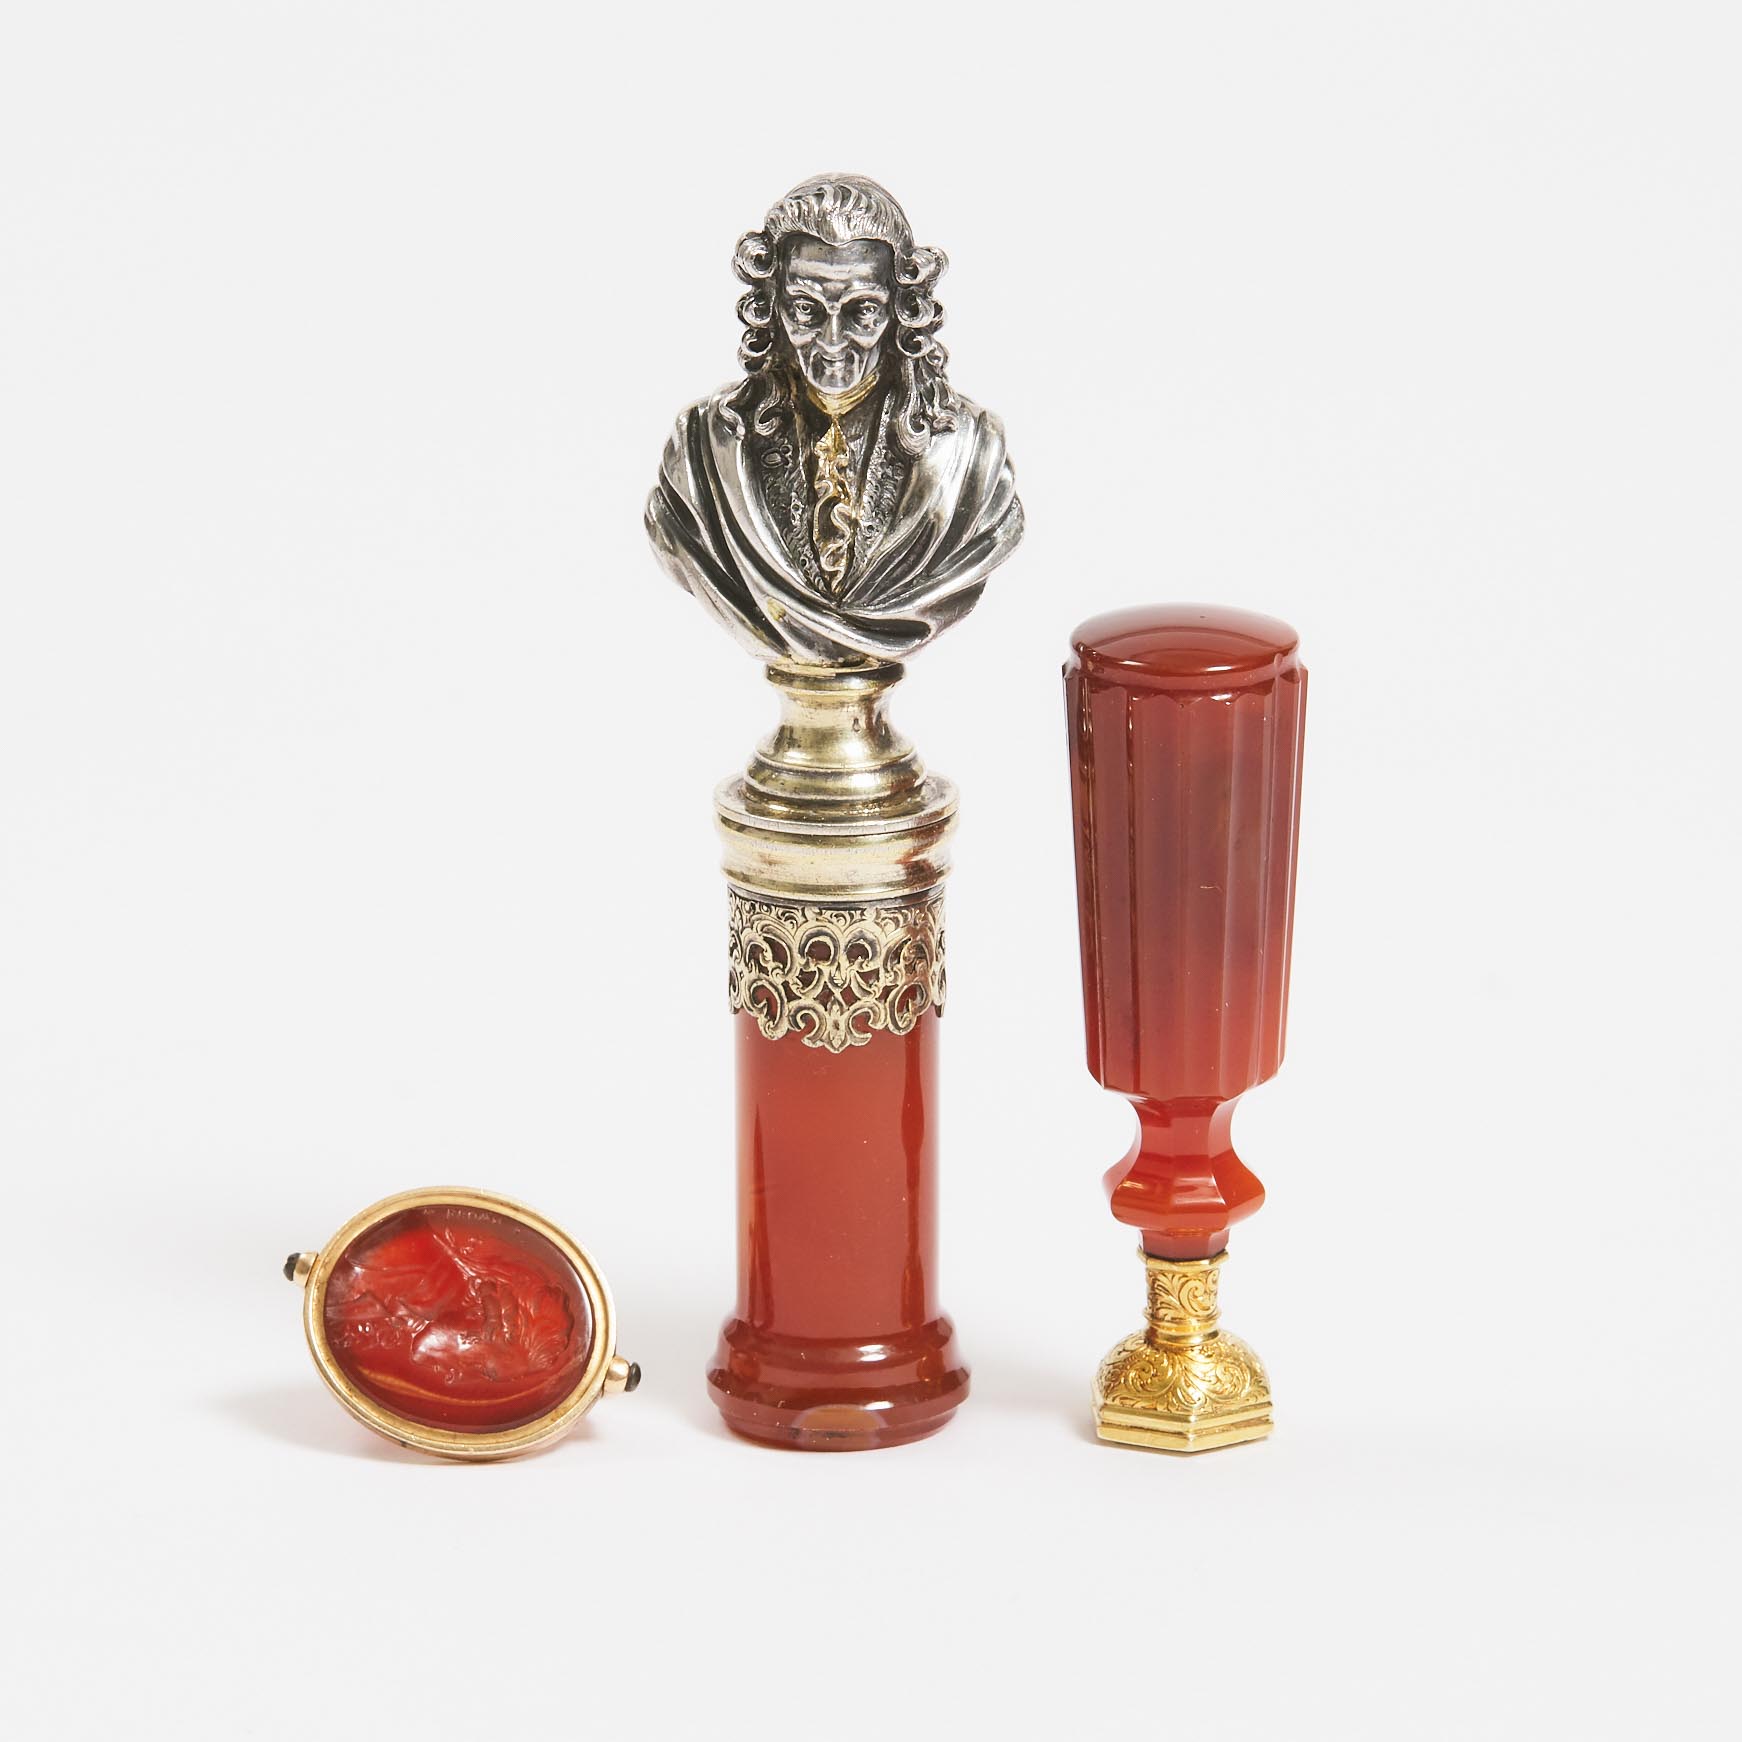 Two Desk Seals and a Fob Seal, early 19th century